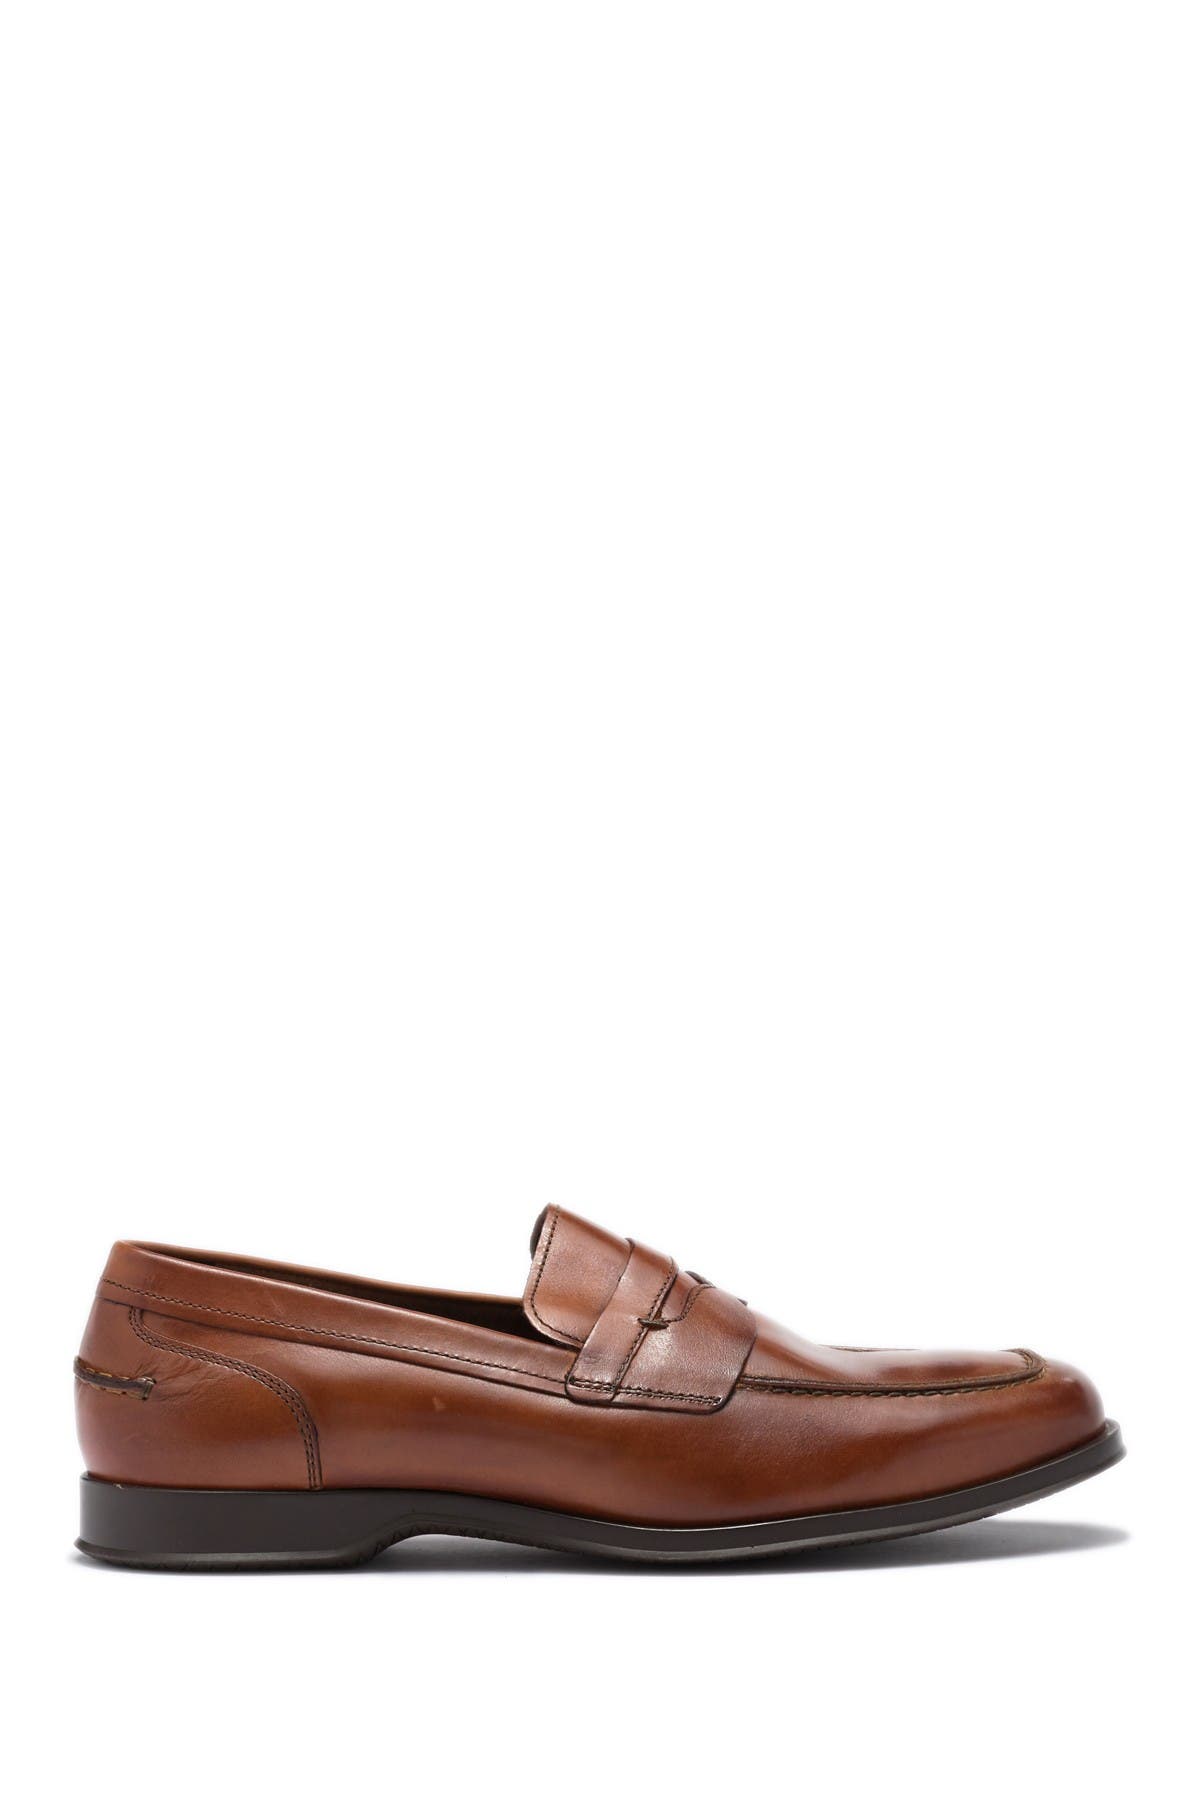 cole haan fleming penny loafer